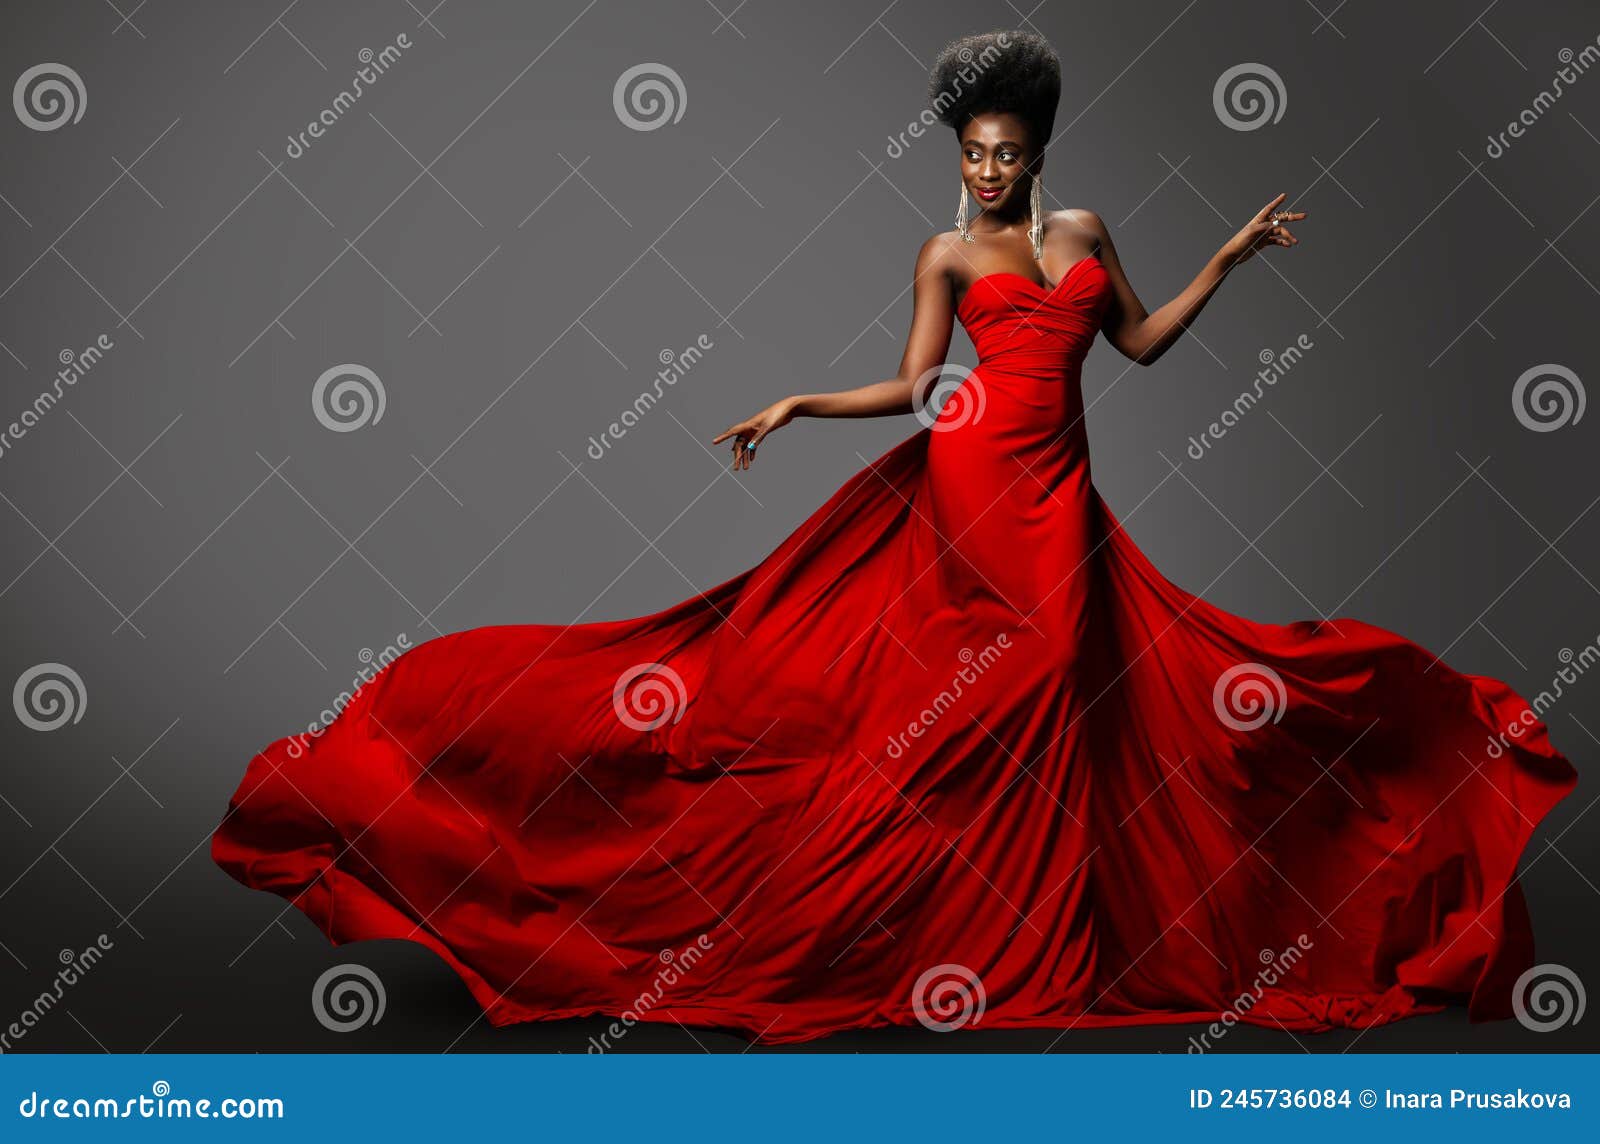 fashion model in red long waving luxury dress. dark skinned beauty woman with afro black hairstyle dancing over gray background.